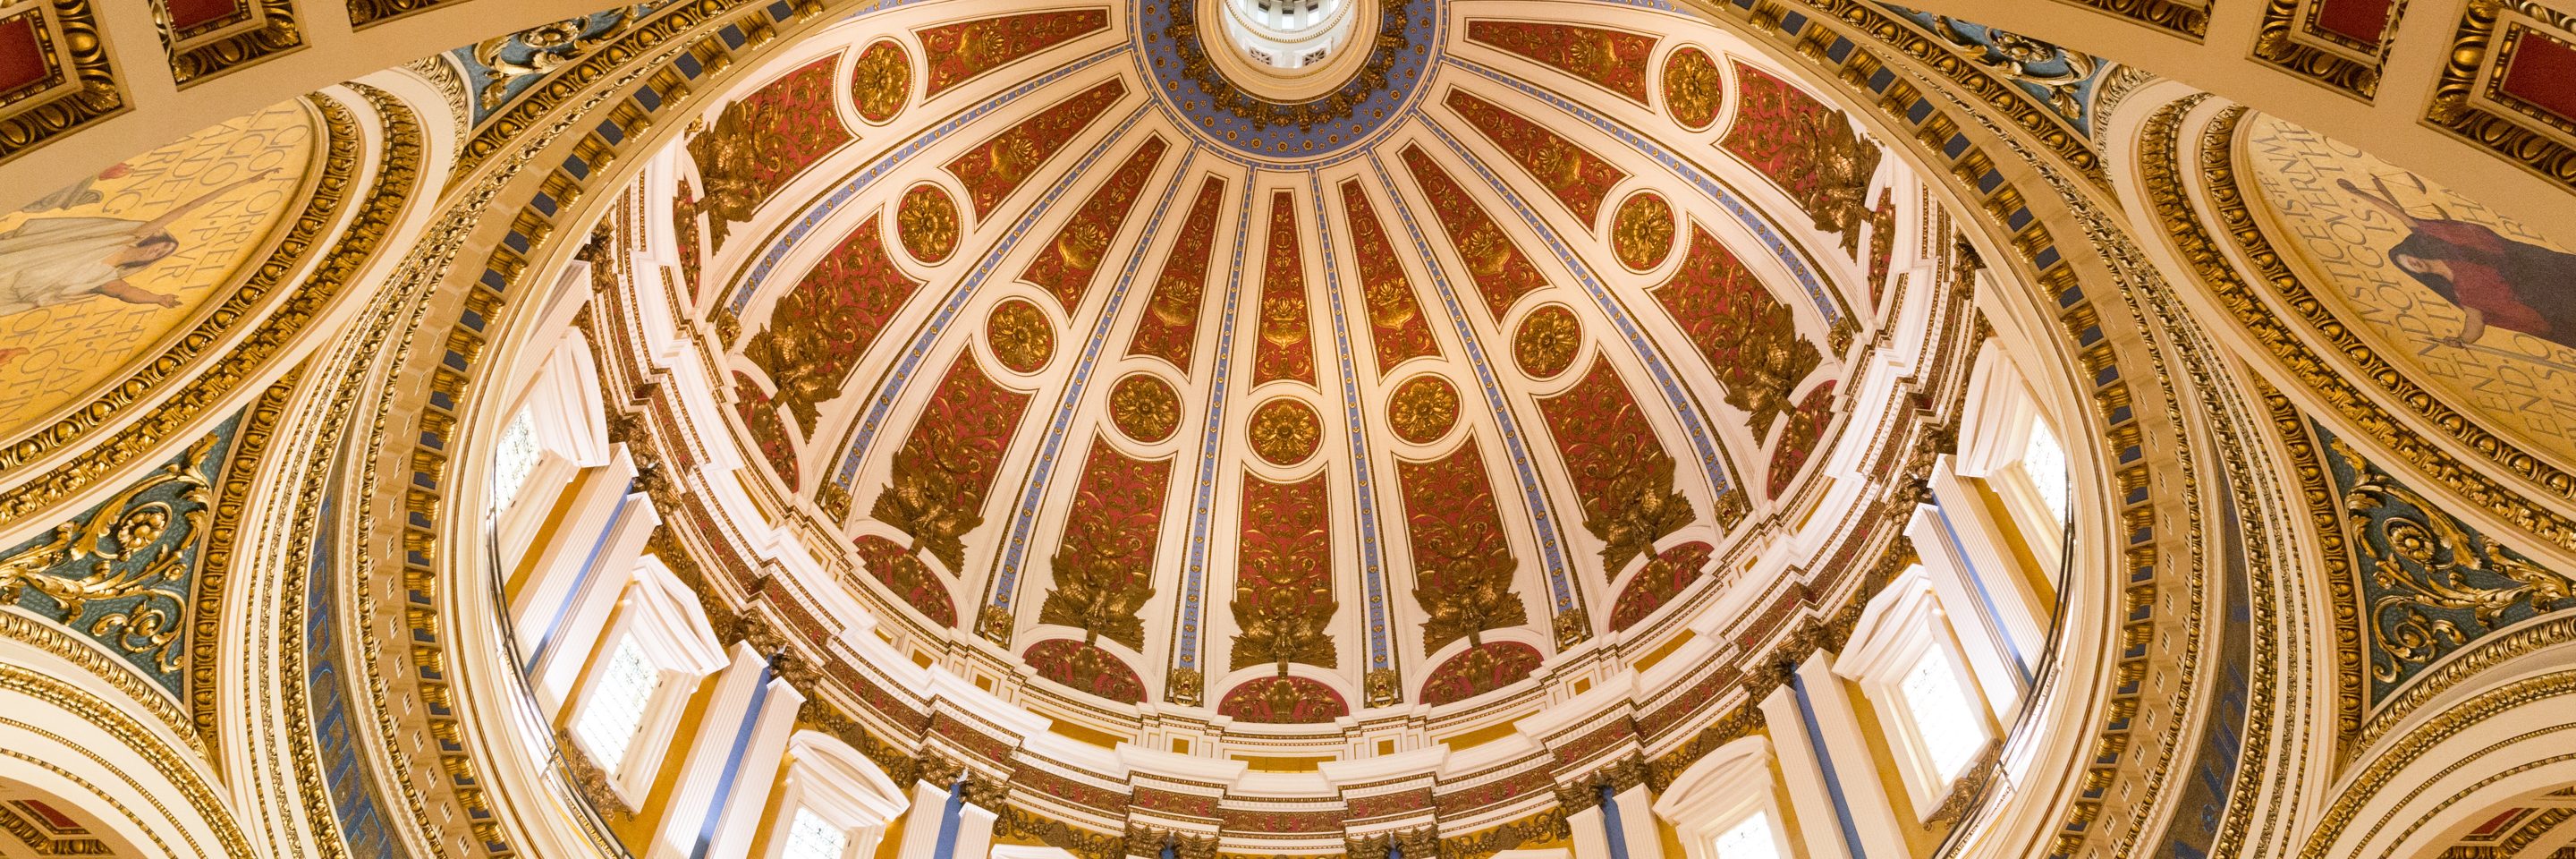 harrisburgcapitoldome.png